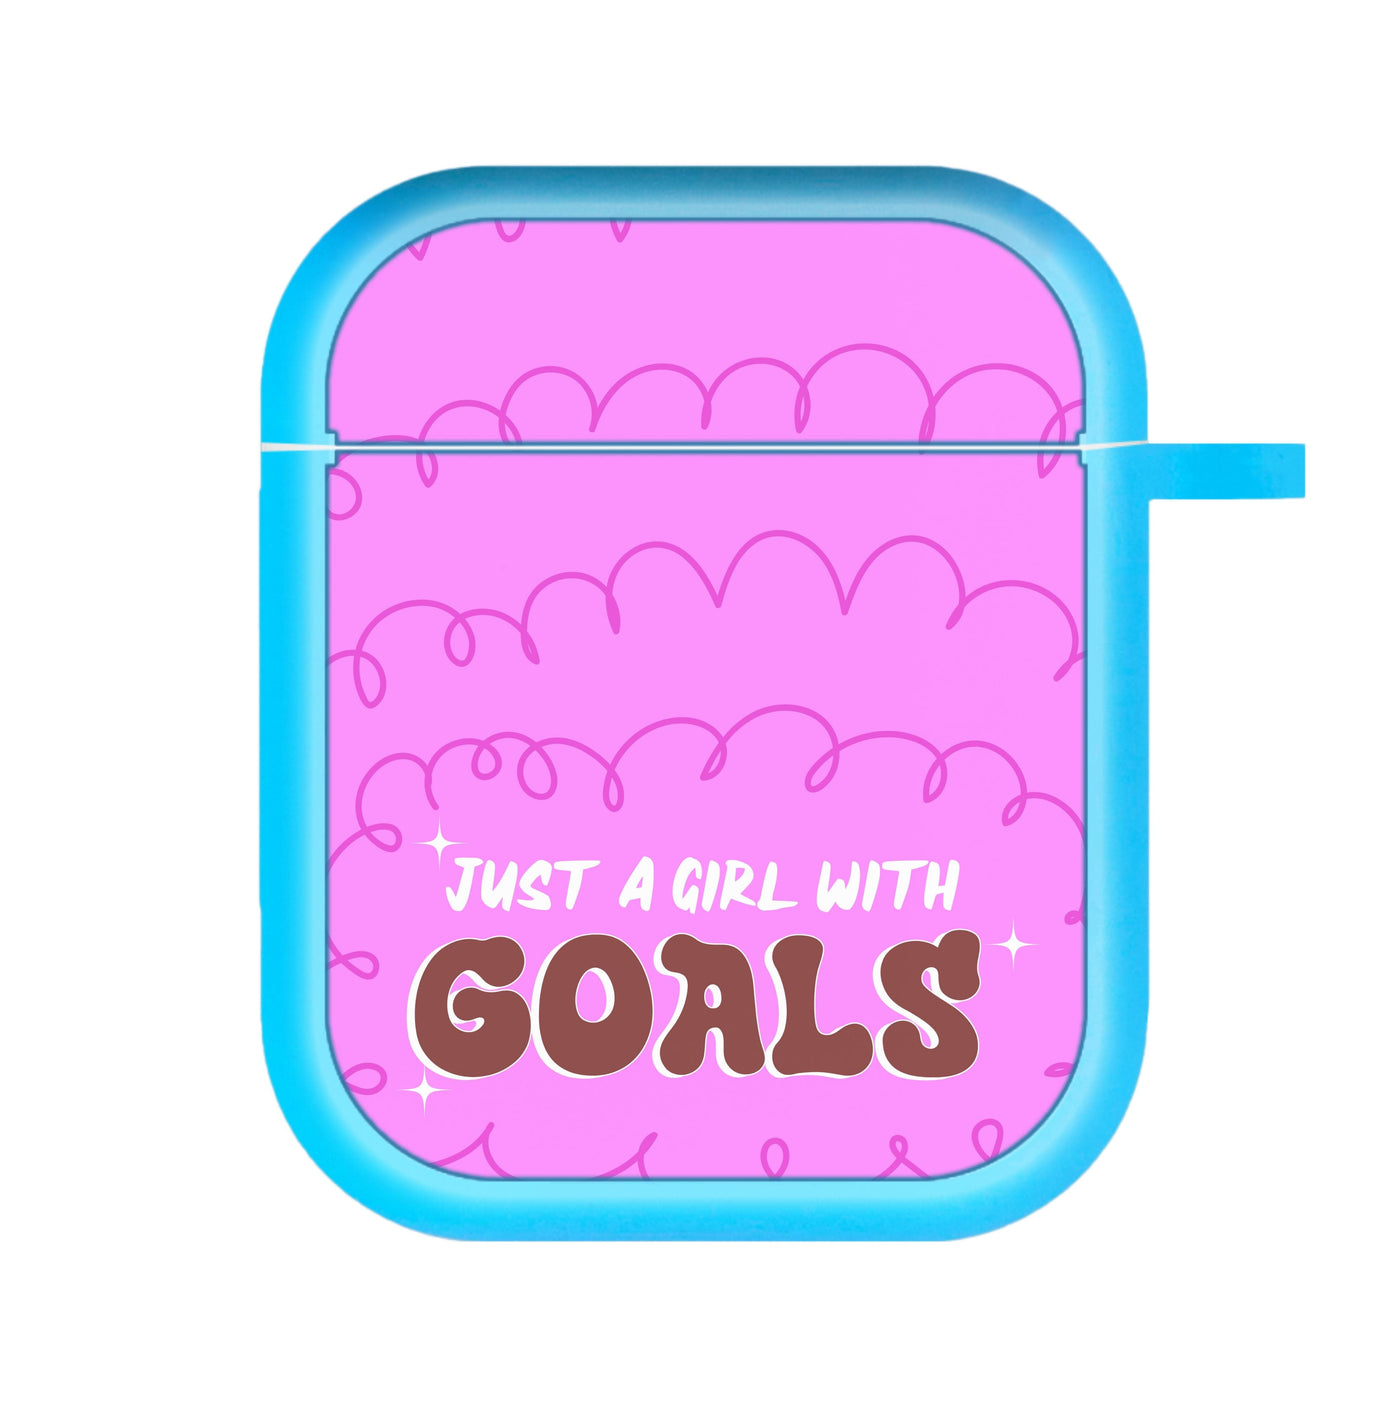 Just A Girl With Goals - Aesthetic Quote AirPods Case